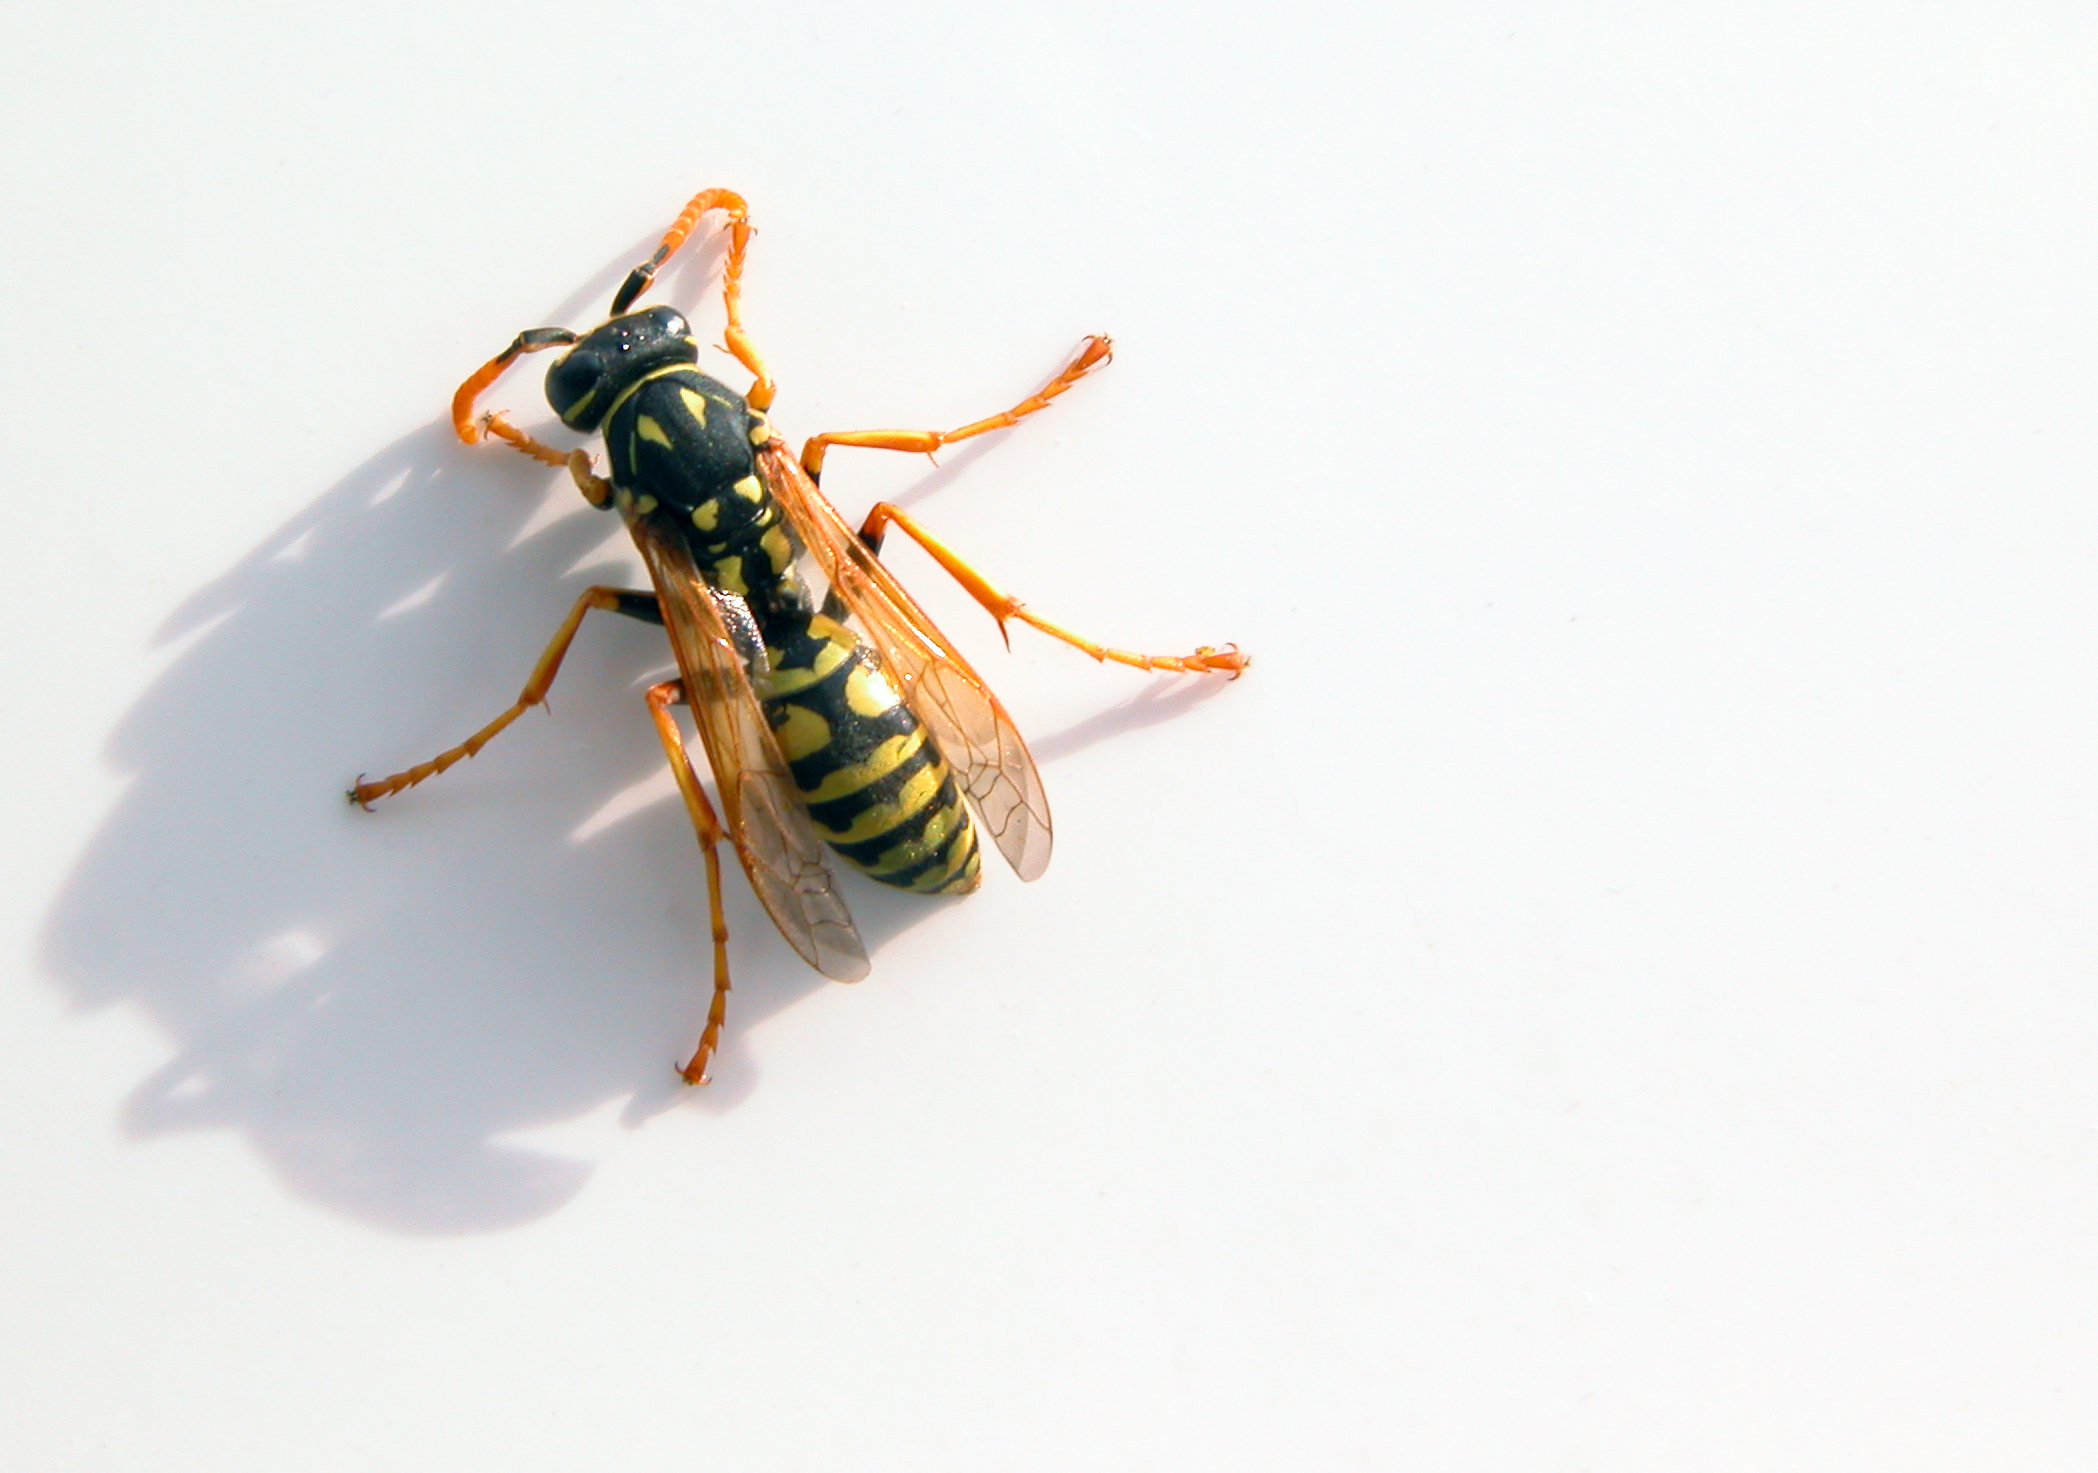 insects, wasp - desktop wallpaper